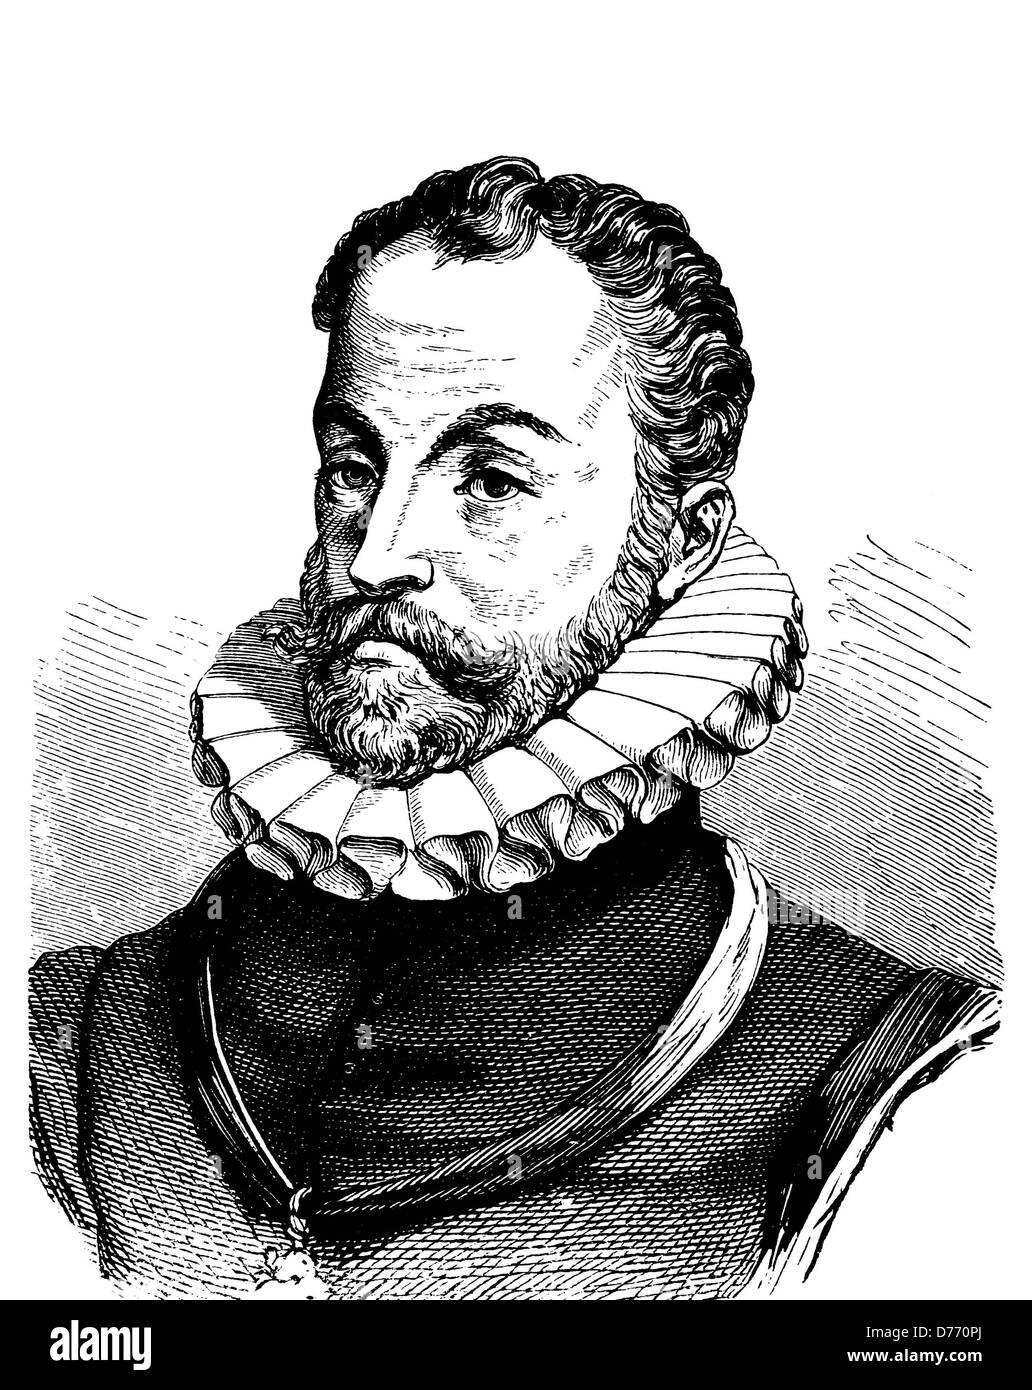 William of Orange-Nassau, 1533 - 1584, leader in the Dutch war of independence, historical woodcut, 1880 Stock Photo